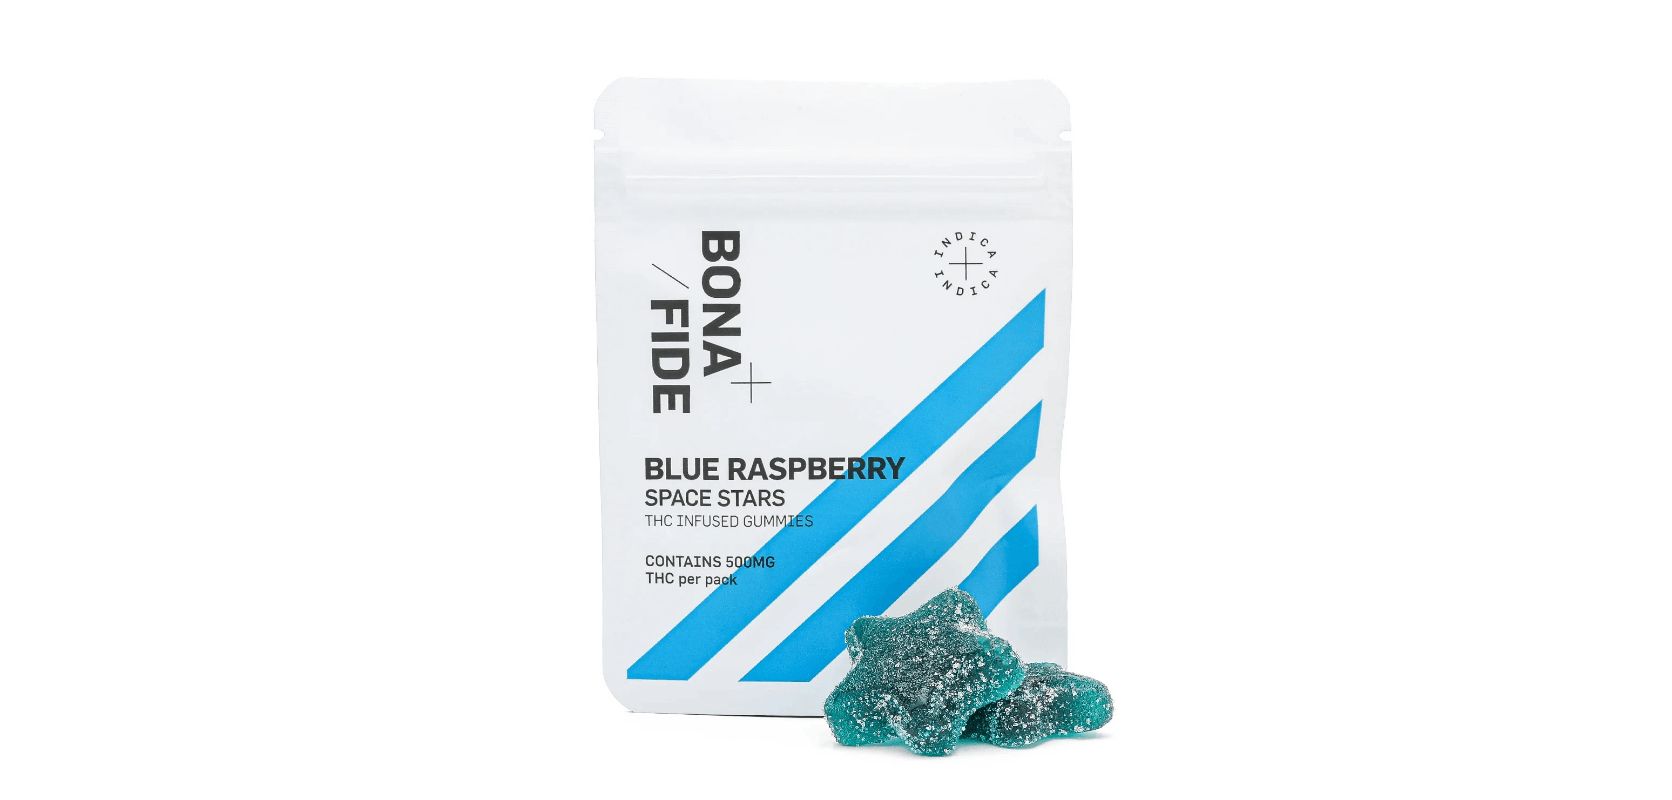 If you're in need of a heavy-hitting Indica edible to help you unwind and drift off into space, your quest is over with the Bonafide – Space Stars.